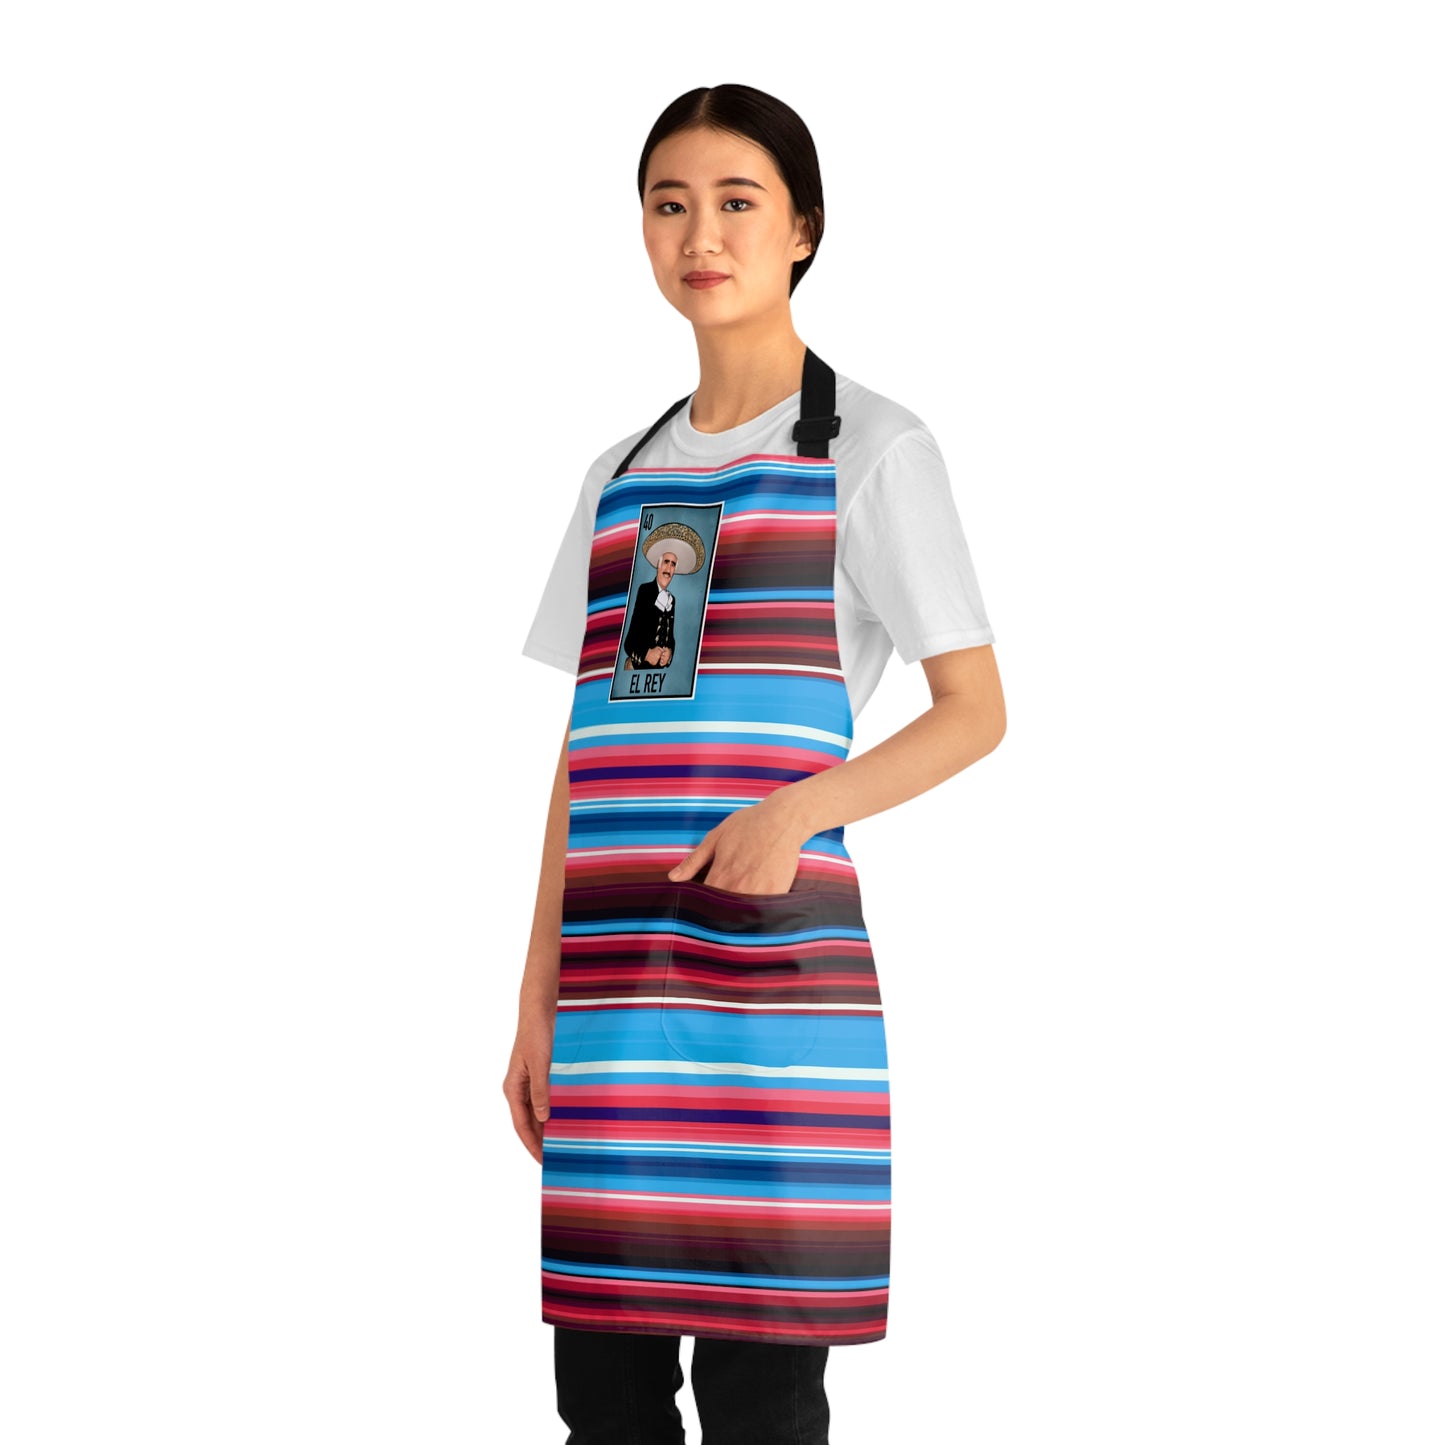 El rey delantal. Mexican Apron for Mexican husband. Birthdays gift for MexicanDad. Father’s Day gift for Mexican.